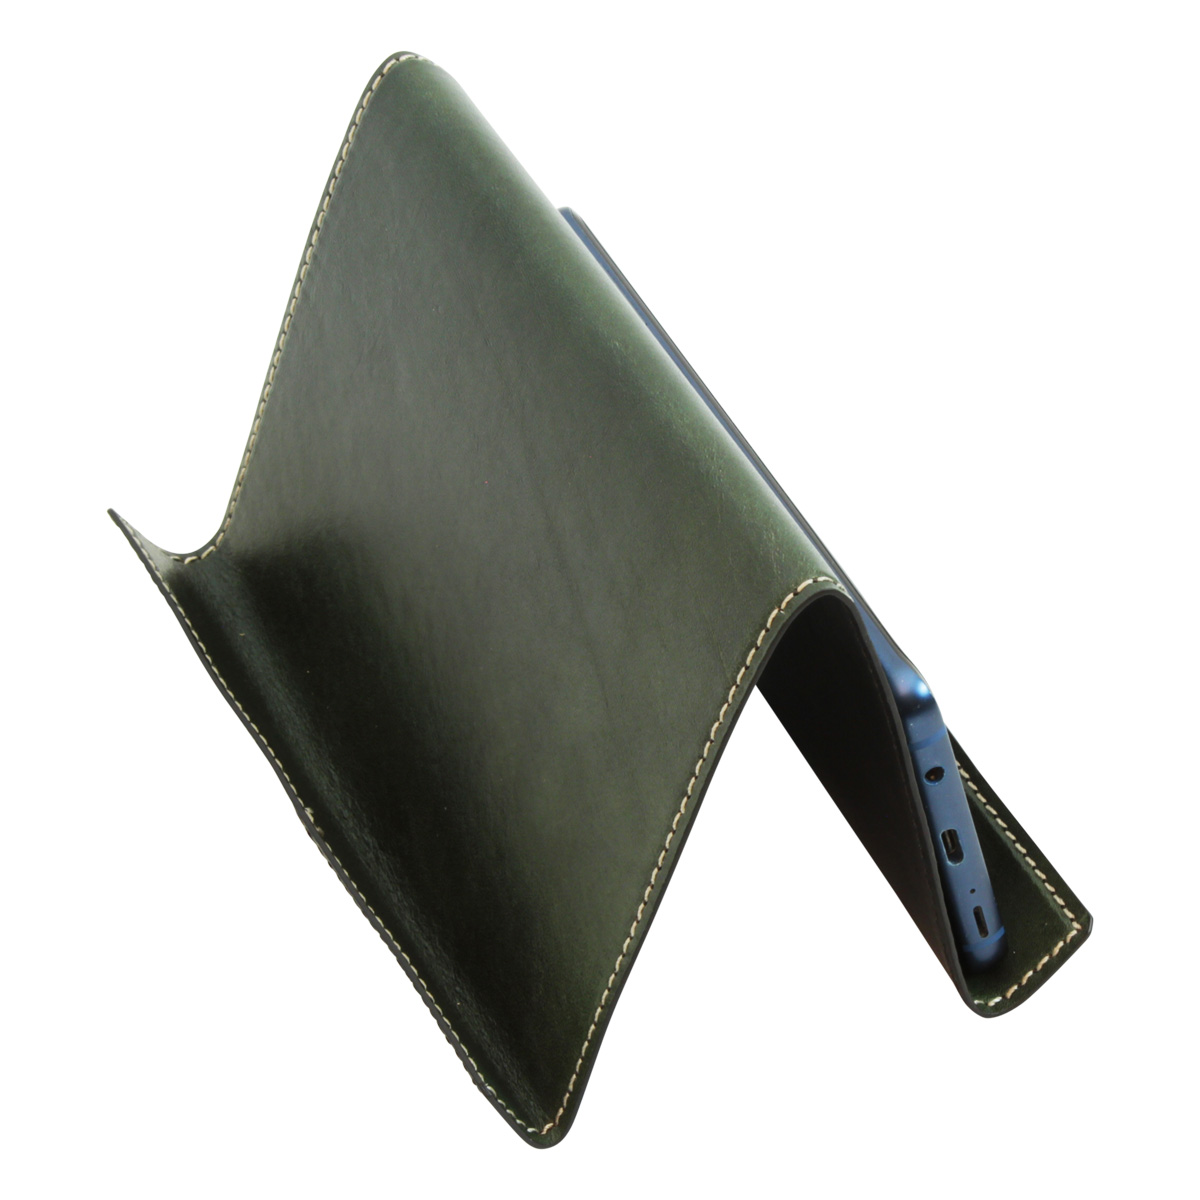 Leather ipad and iphone stand - green | 764089VE US | Old Angler Firenze